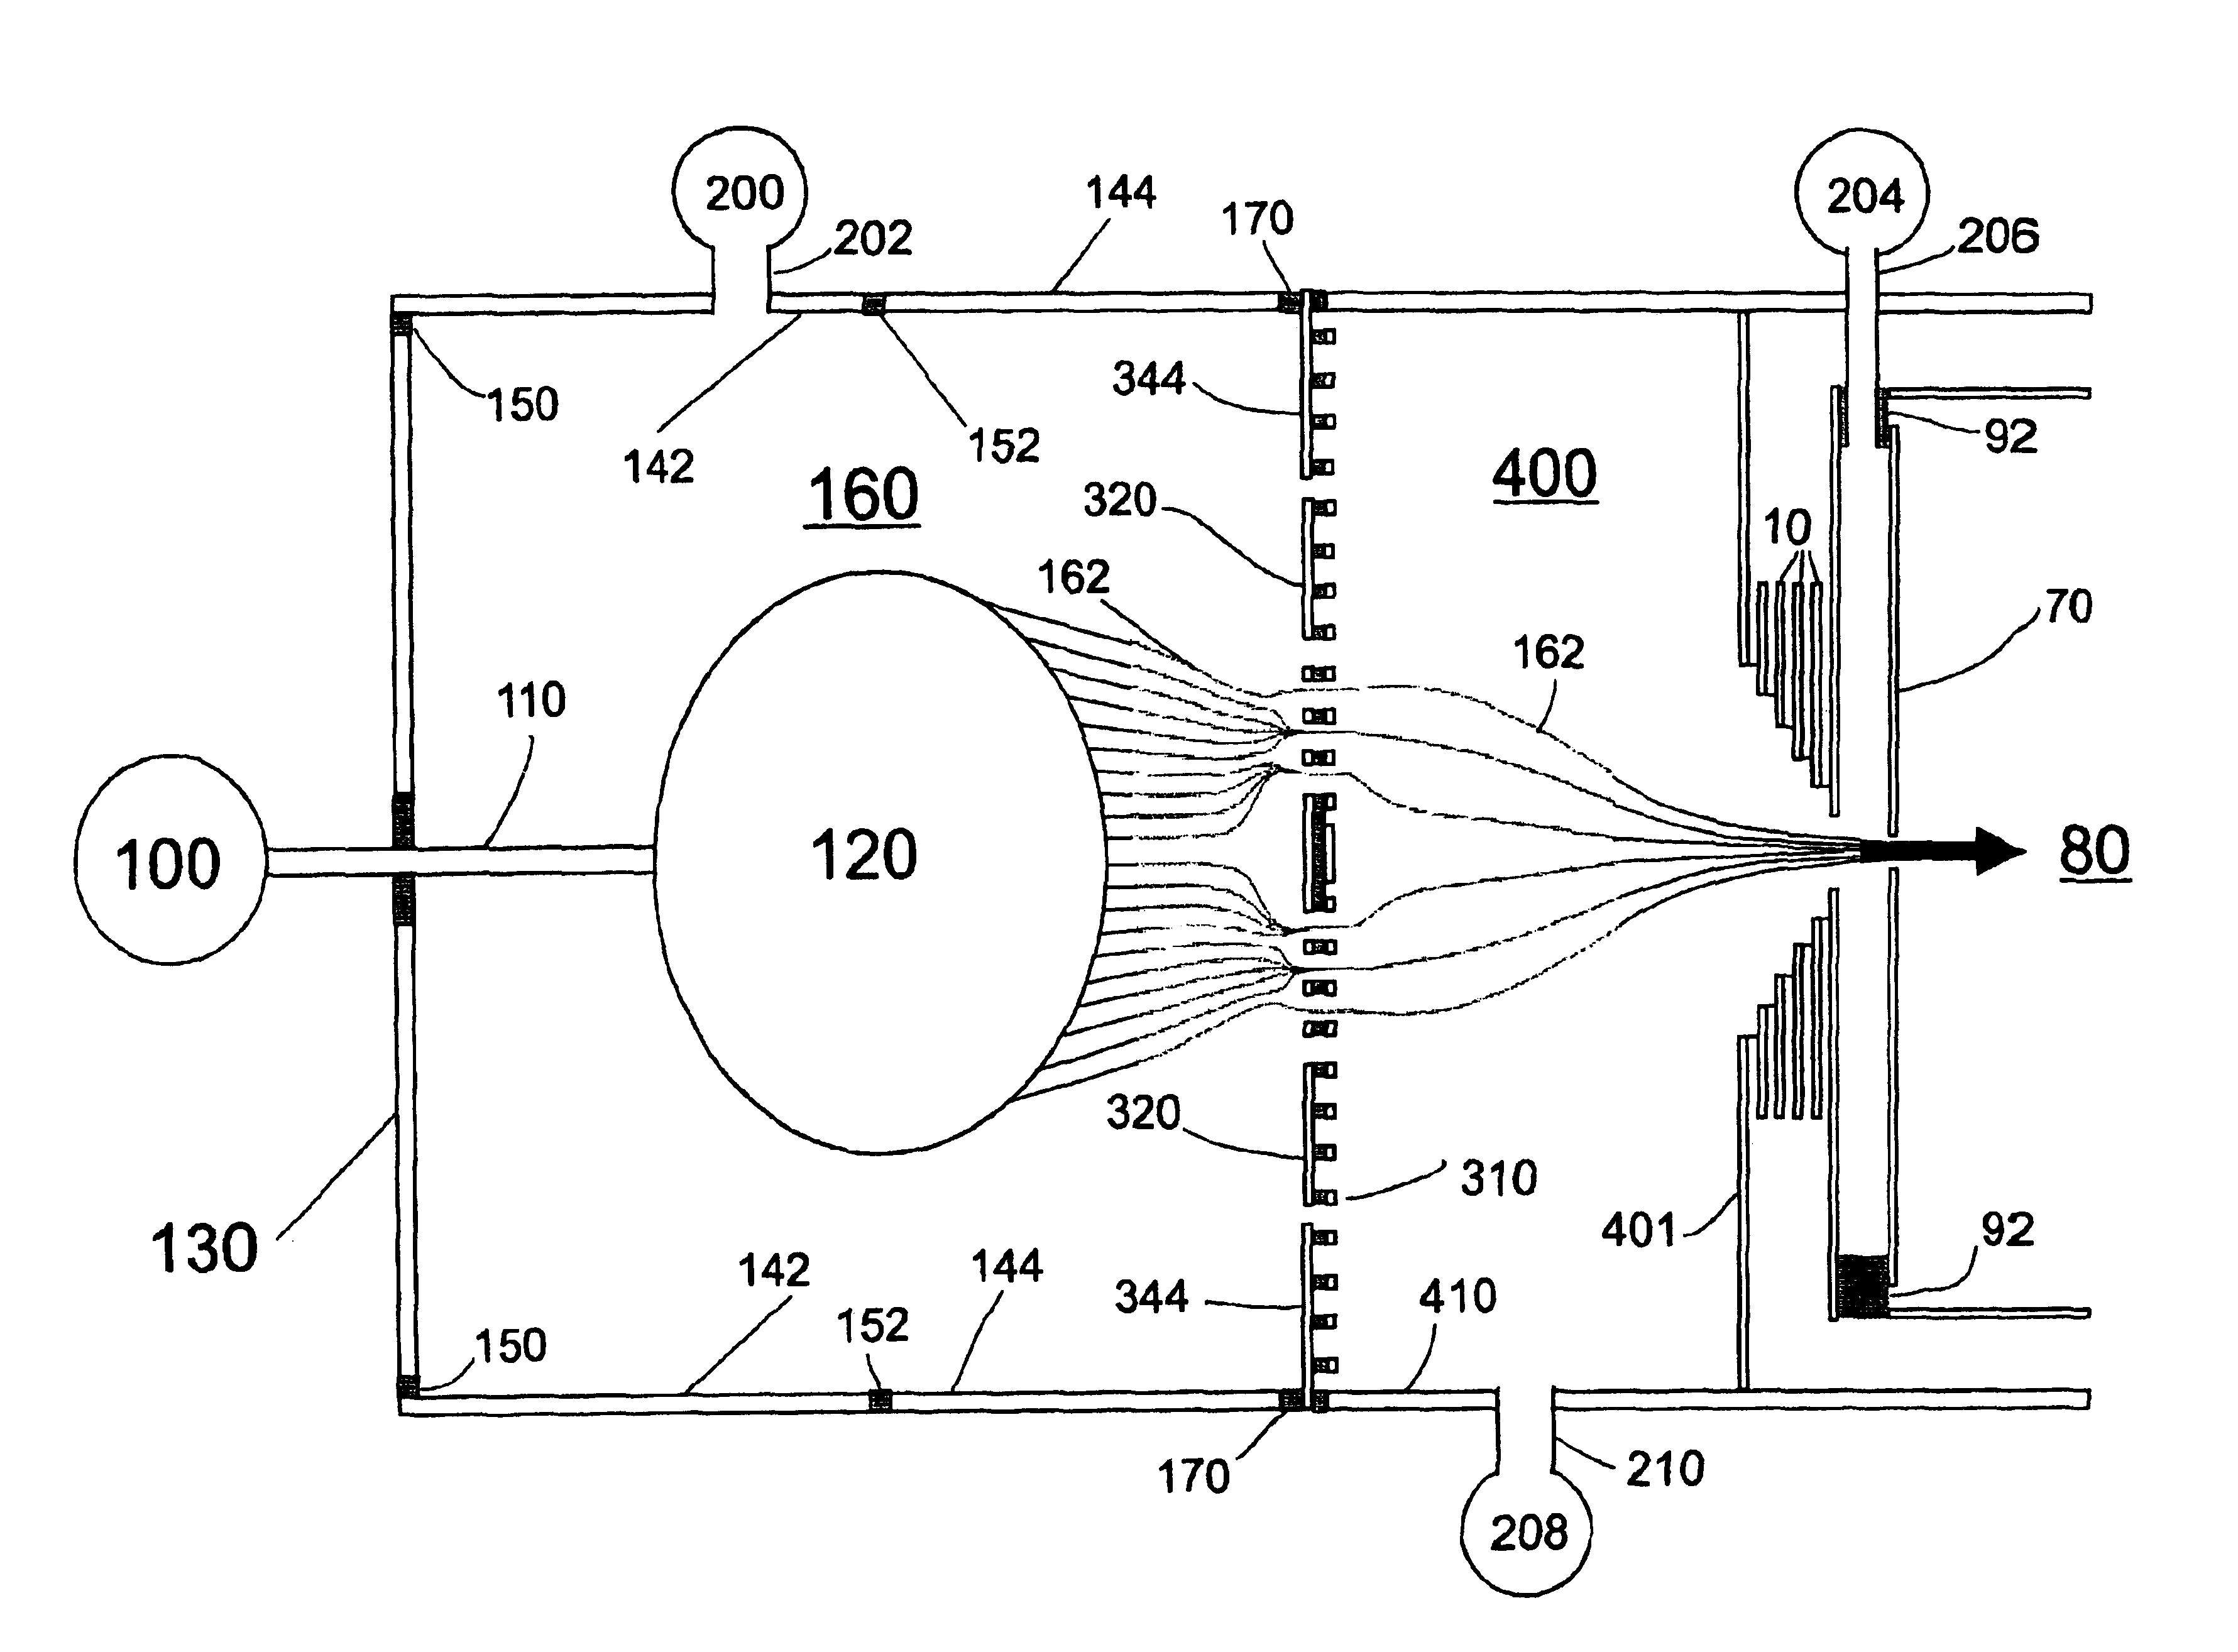 Laminated lens for introducing gas-phase ions into the vacuum systems of mass spectrometers